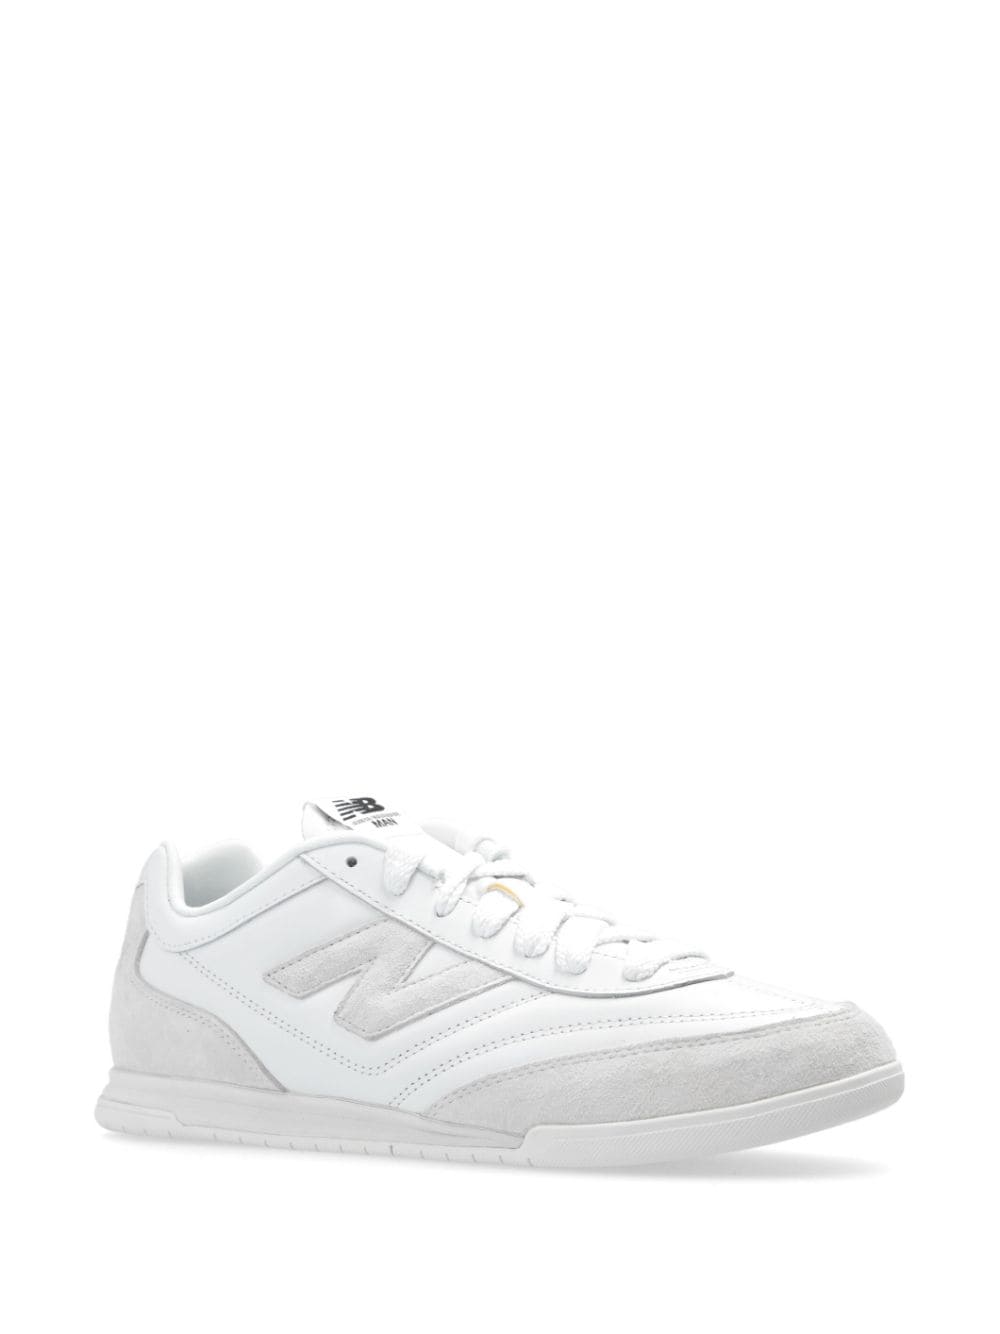 Baskets blanches RC42 x New Balance